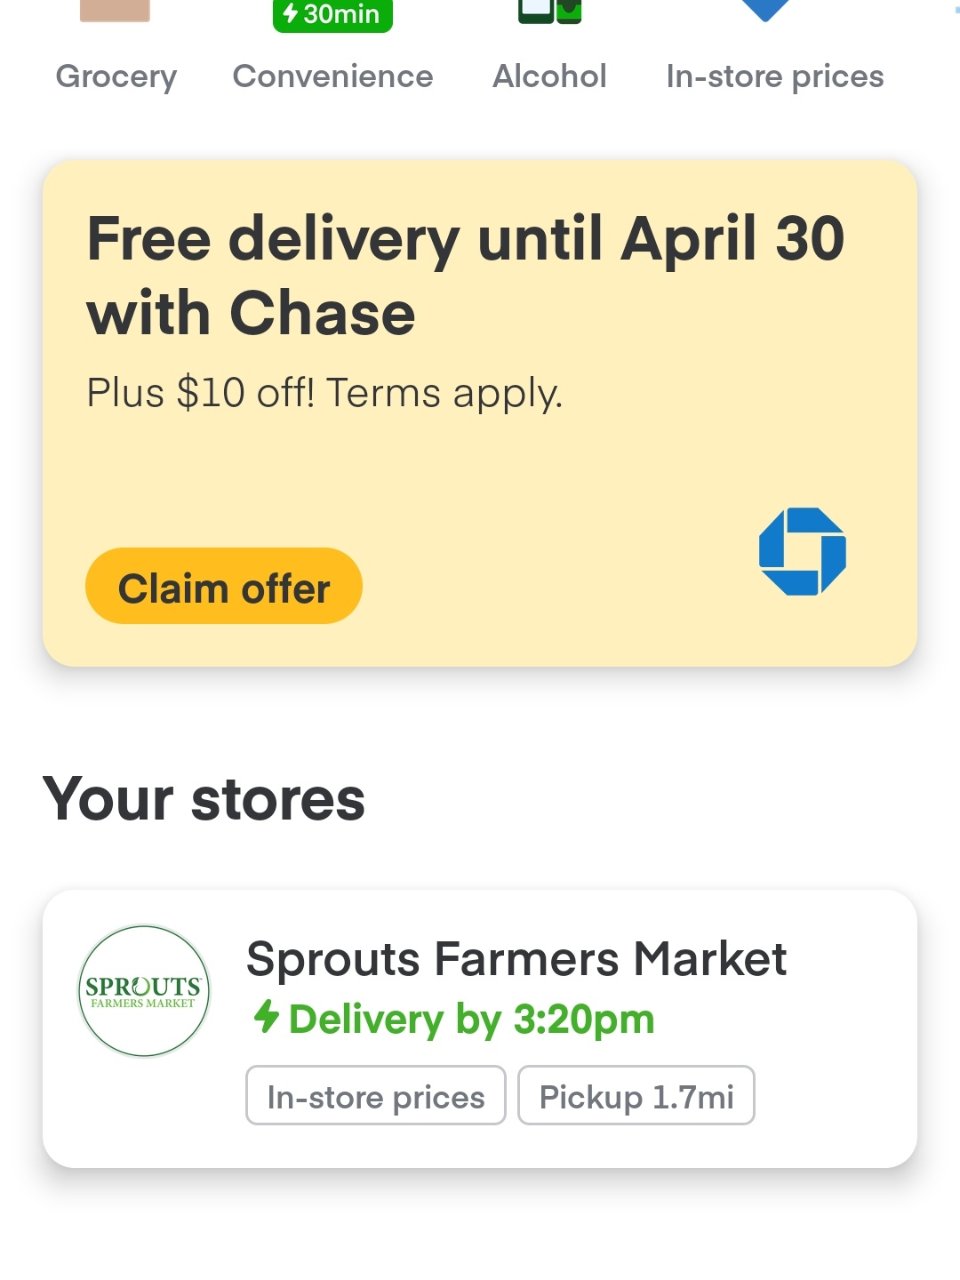 Instacart+sprouts合作满...